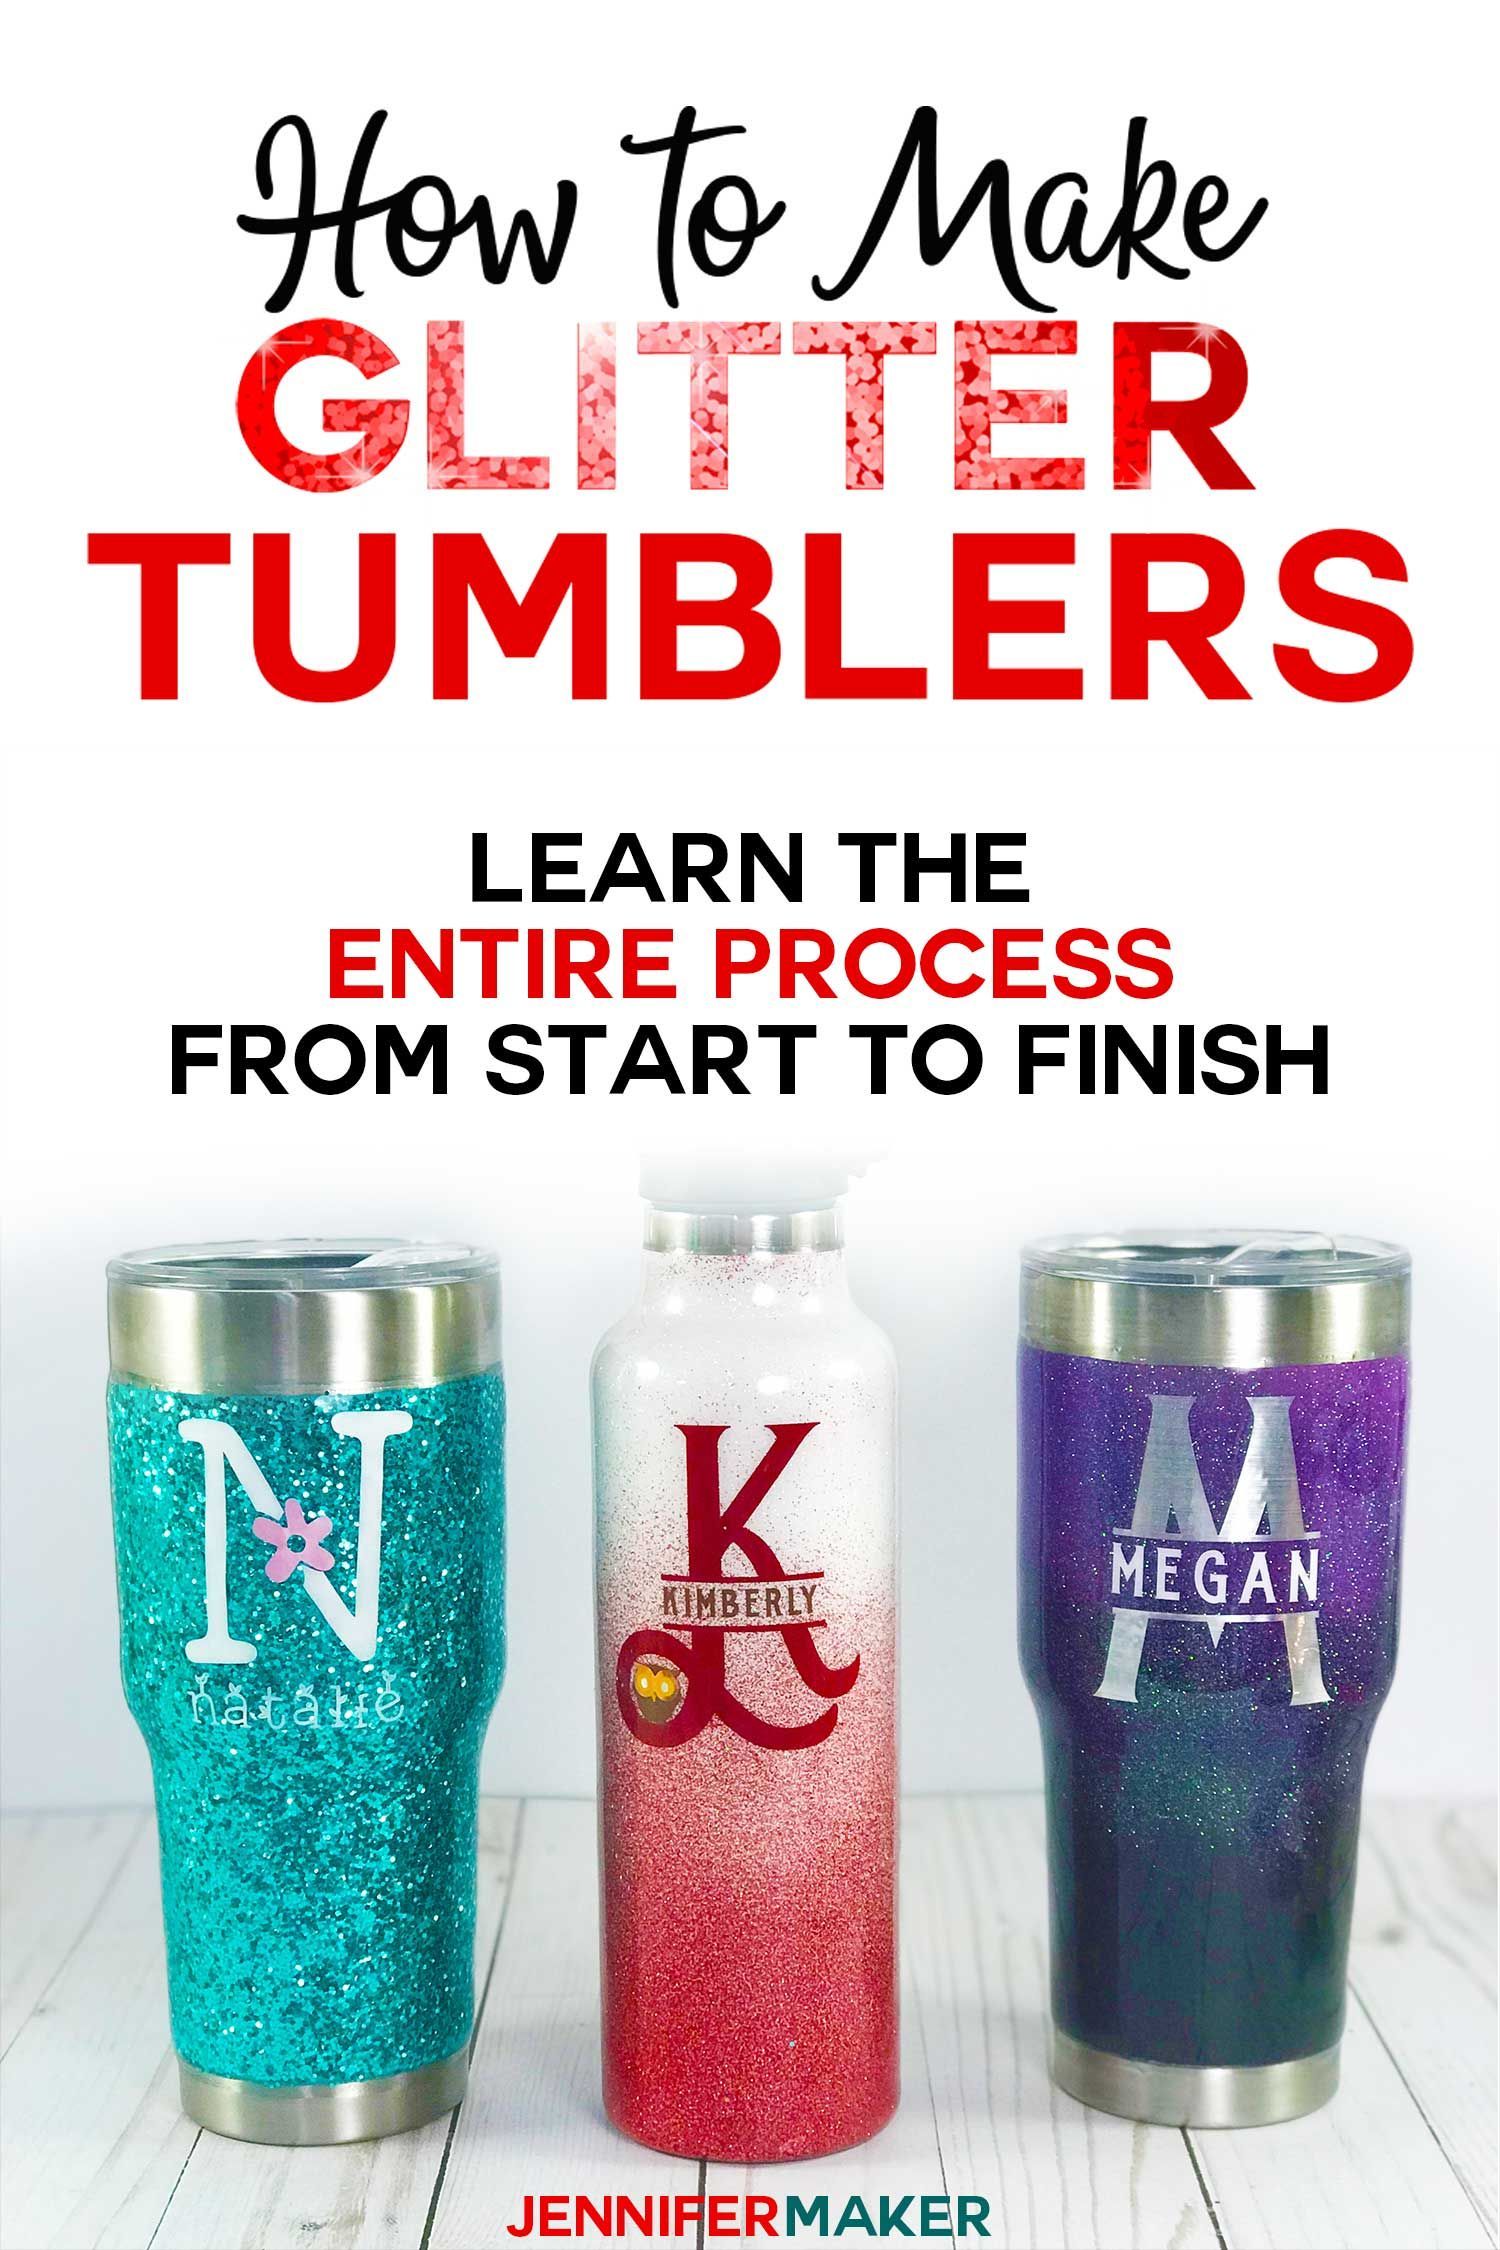 DIY Glitter Tumblers - Step-by-Step Photos & Video Tutorial -   19 diy projects For Kids step by step ideas